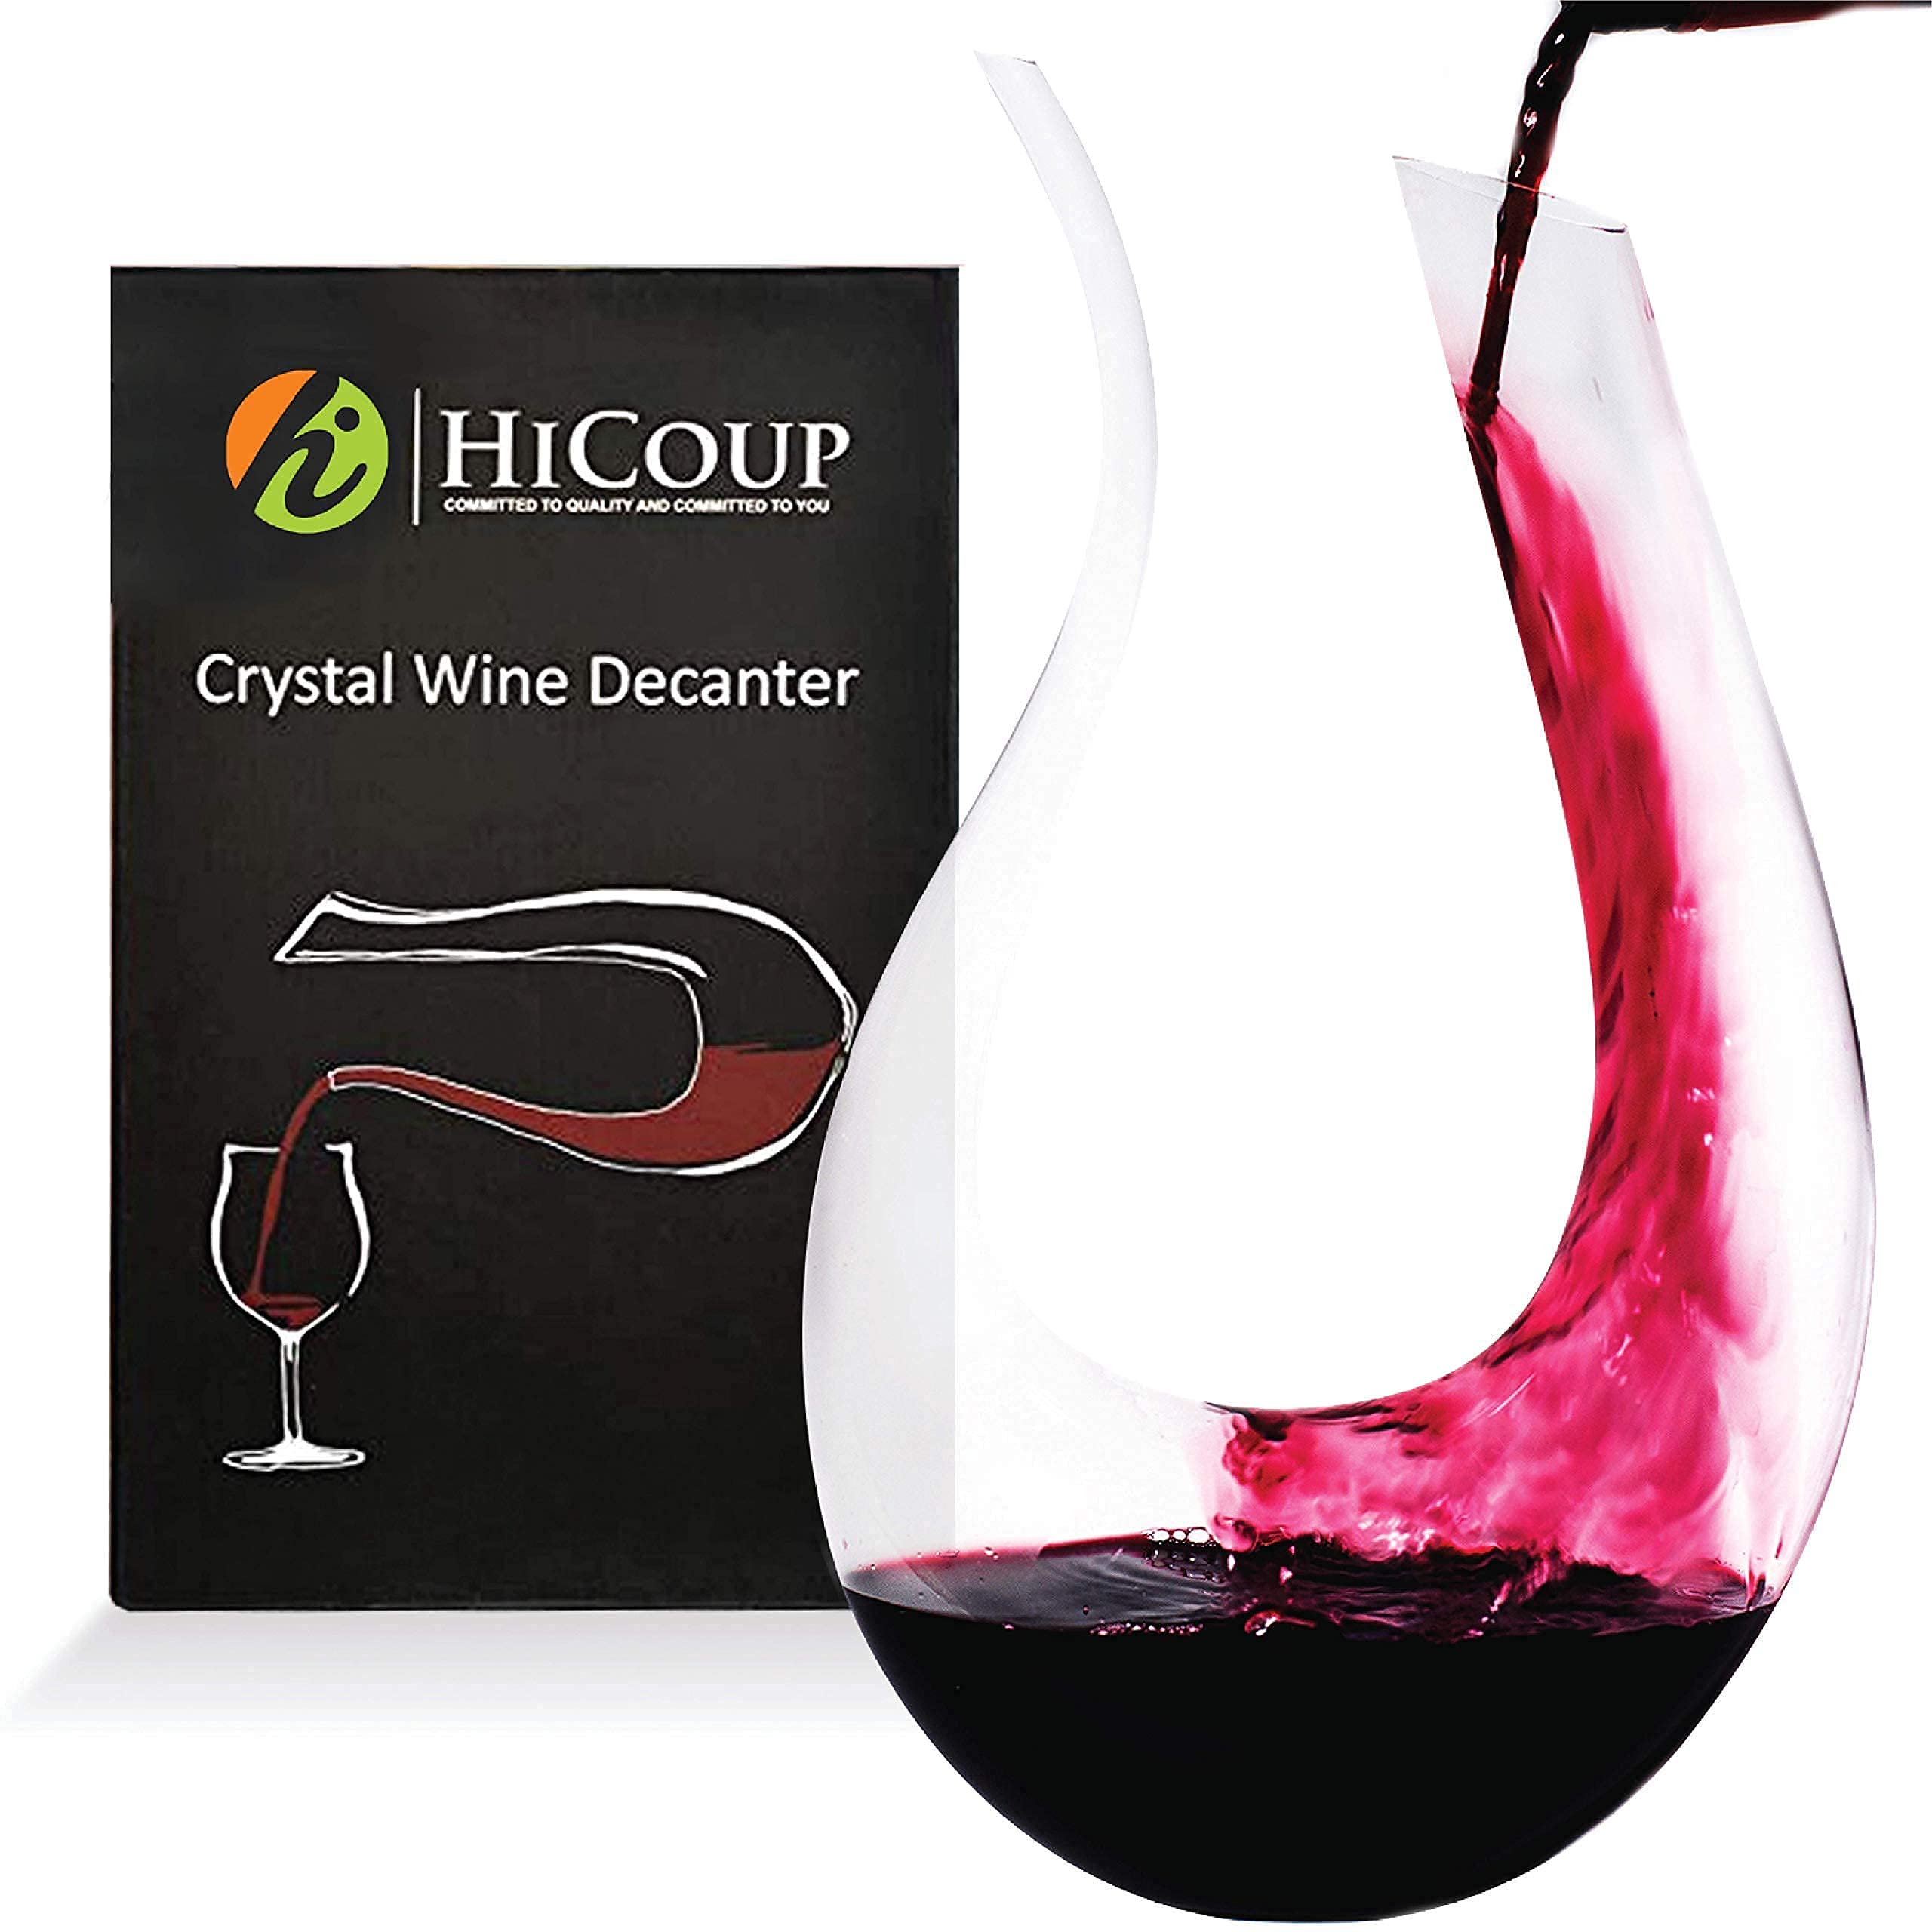 Wine Decanter and Rosewood Waiter's Corkscrew by HiCoup